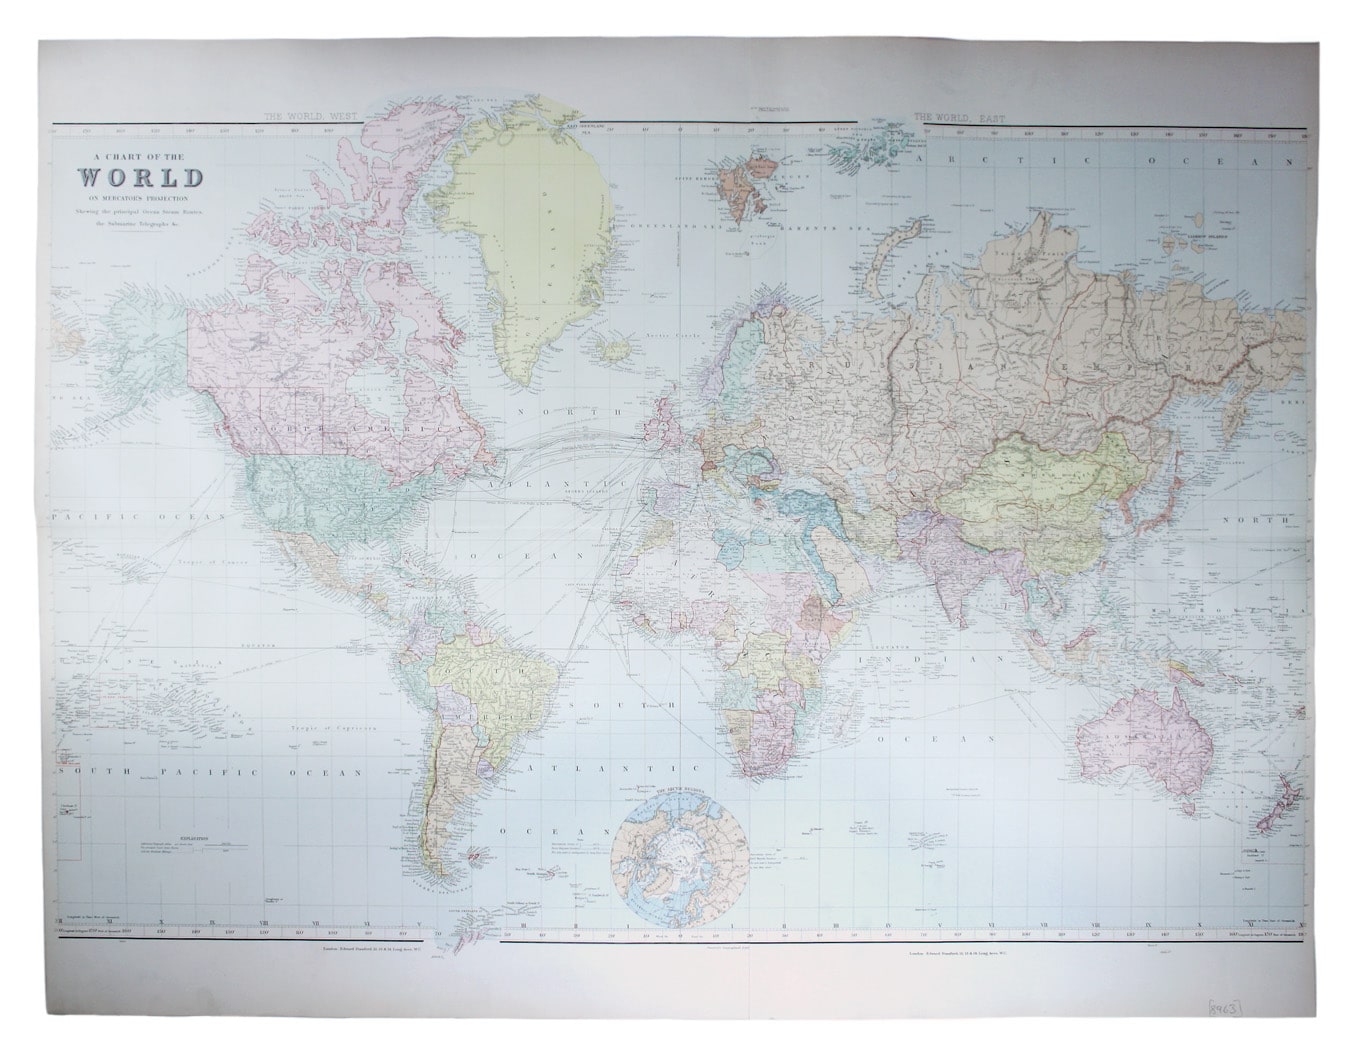 Stanford’s World Map on Mercator’s Projection